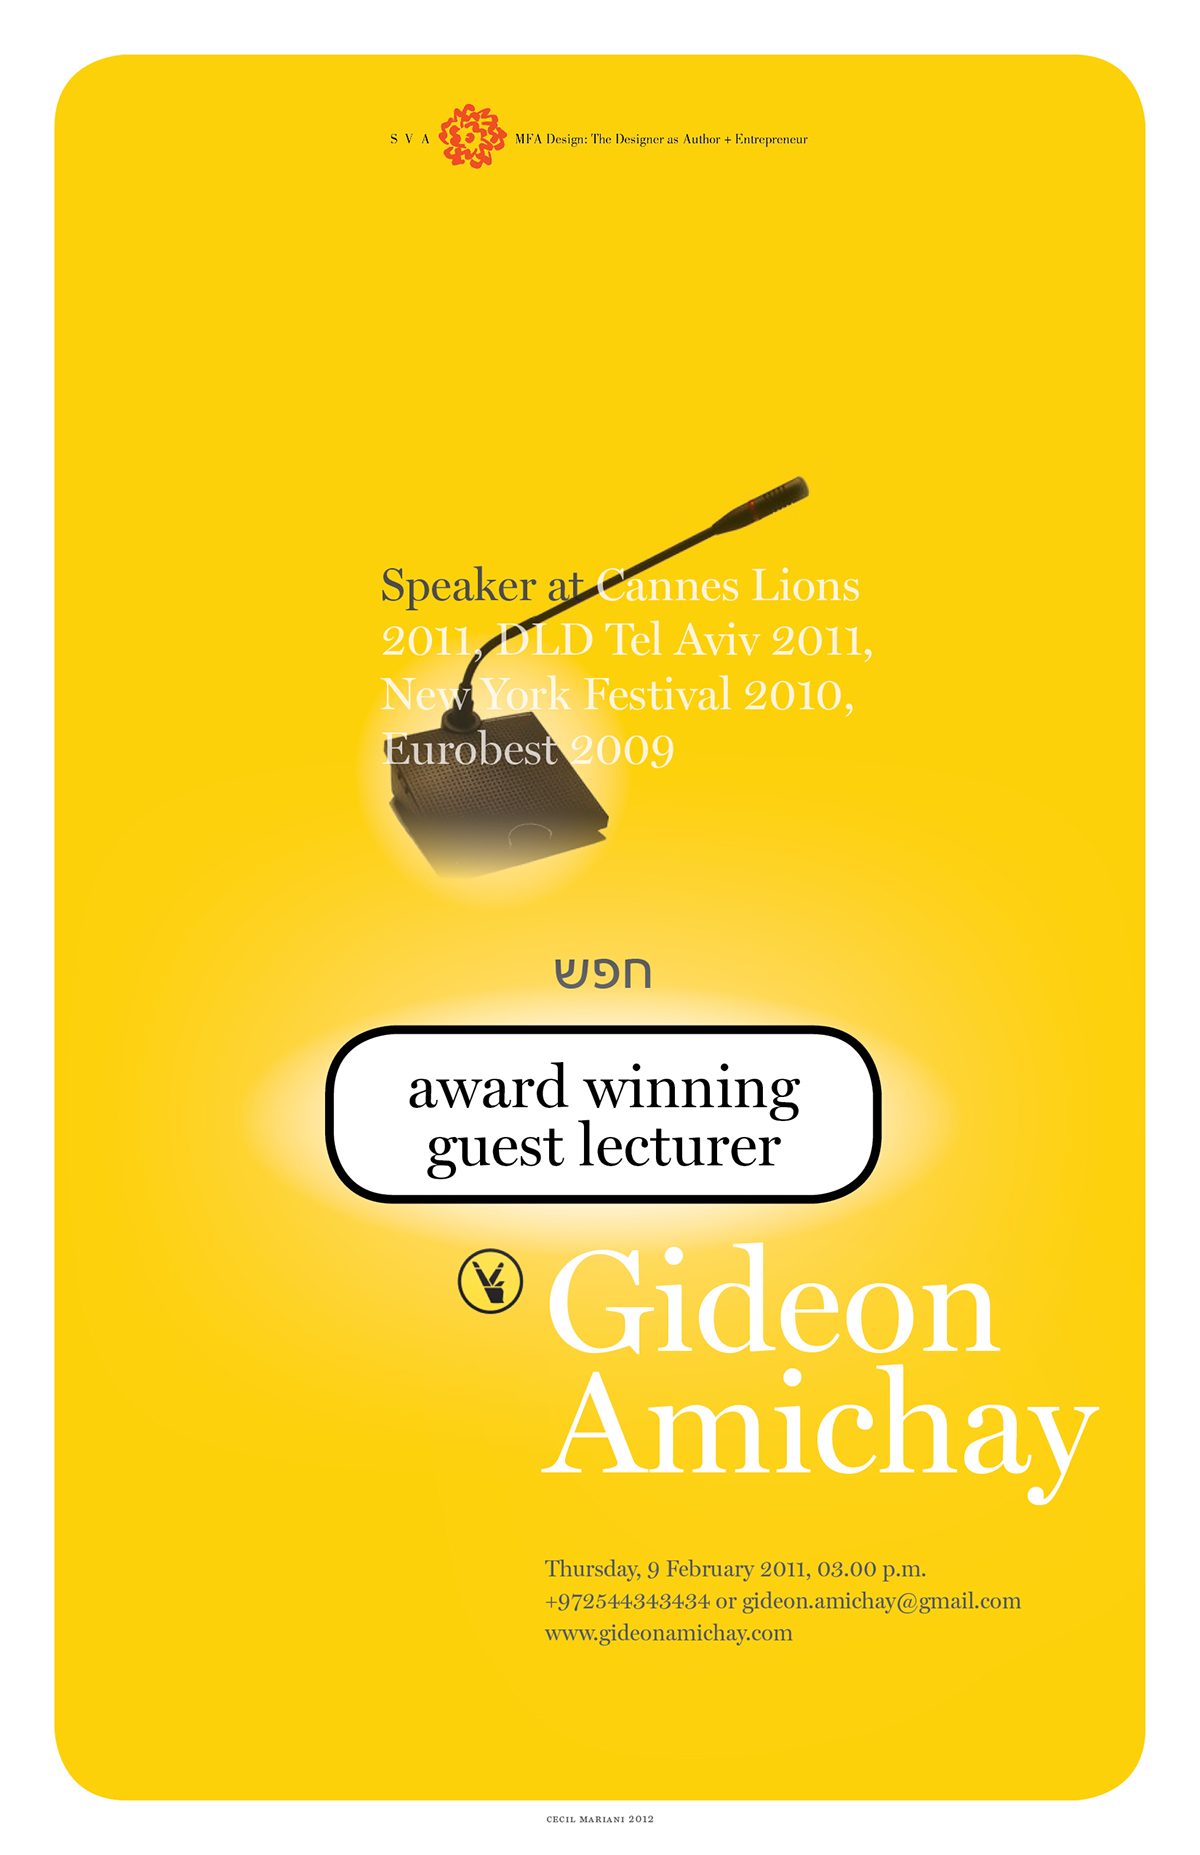 gideon amichay lecture poster sva  MFAD  guest lecture